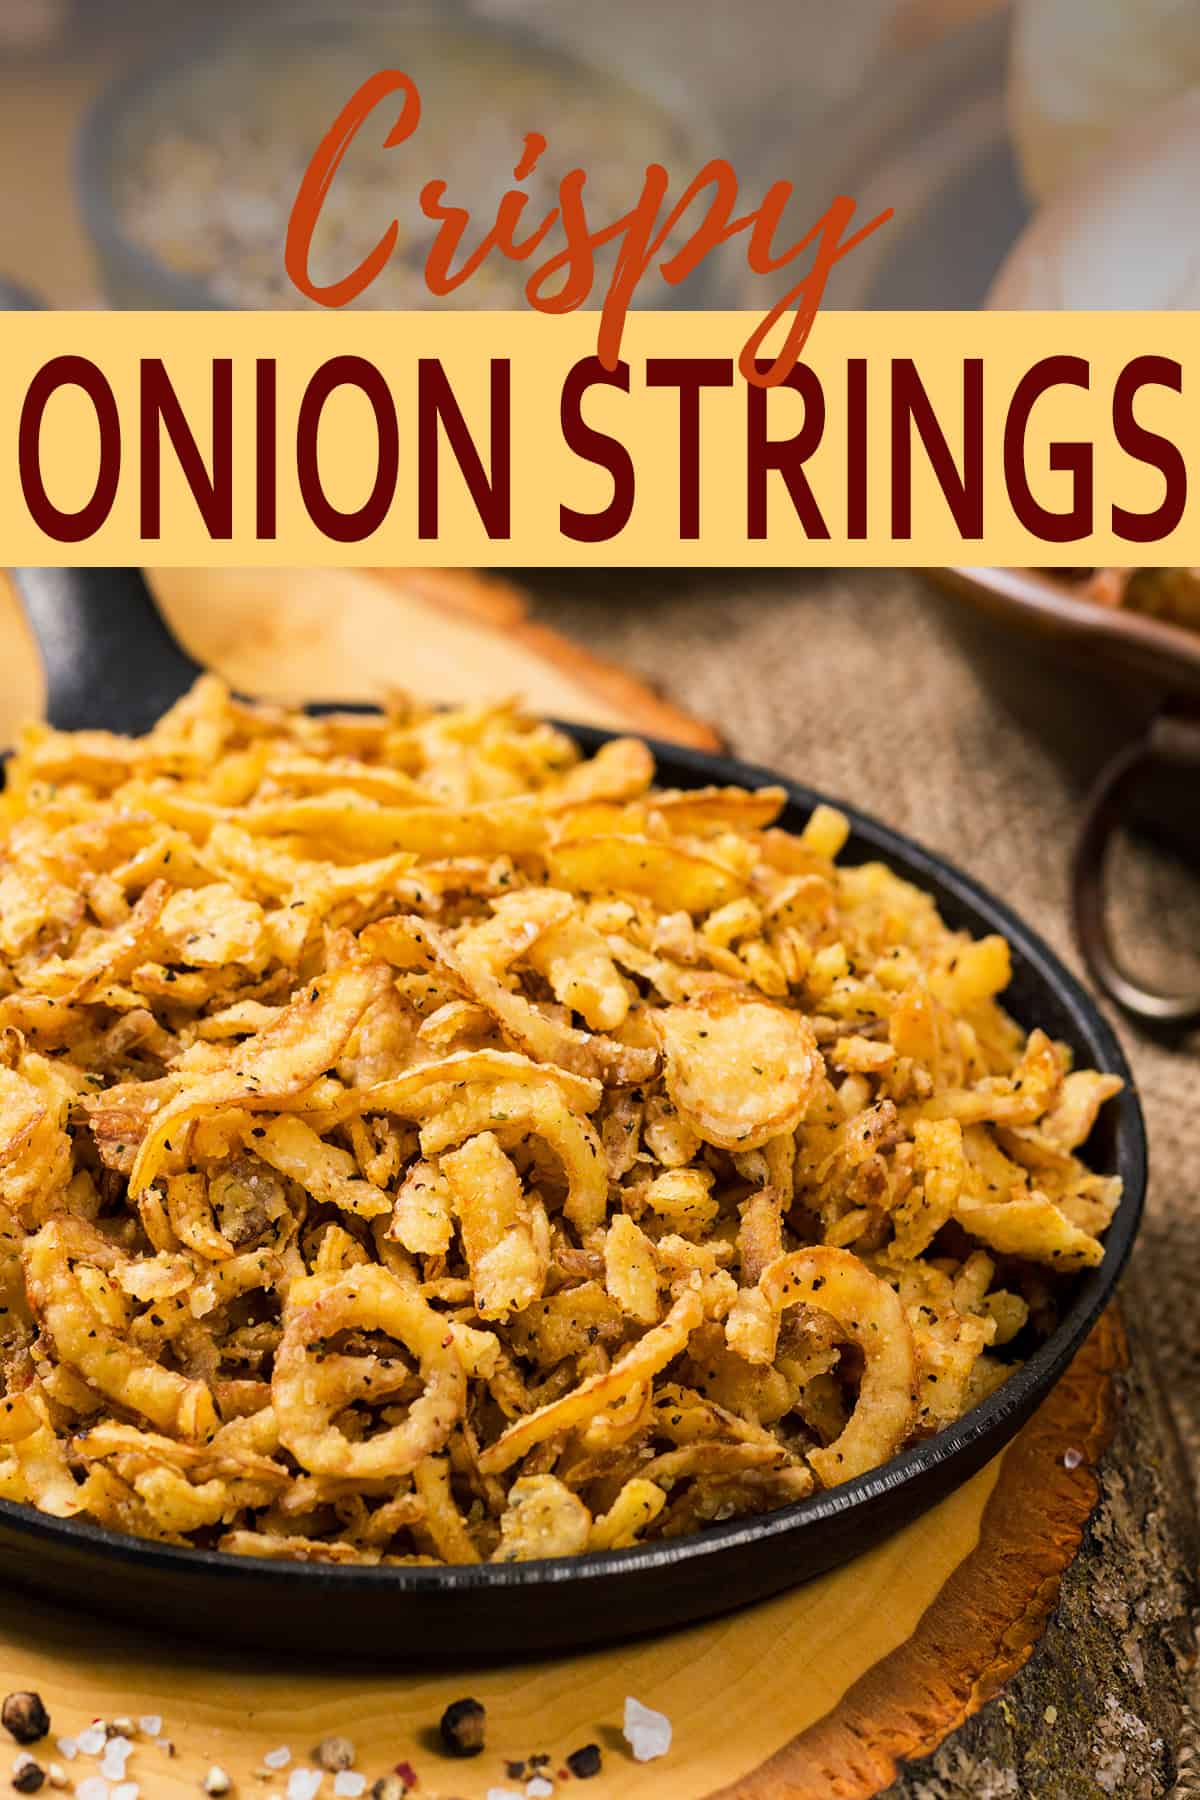 Pan full of french fried onions on a wood background.